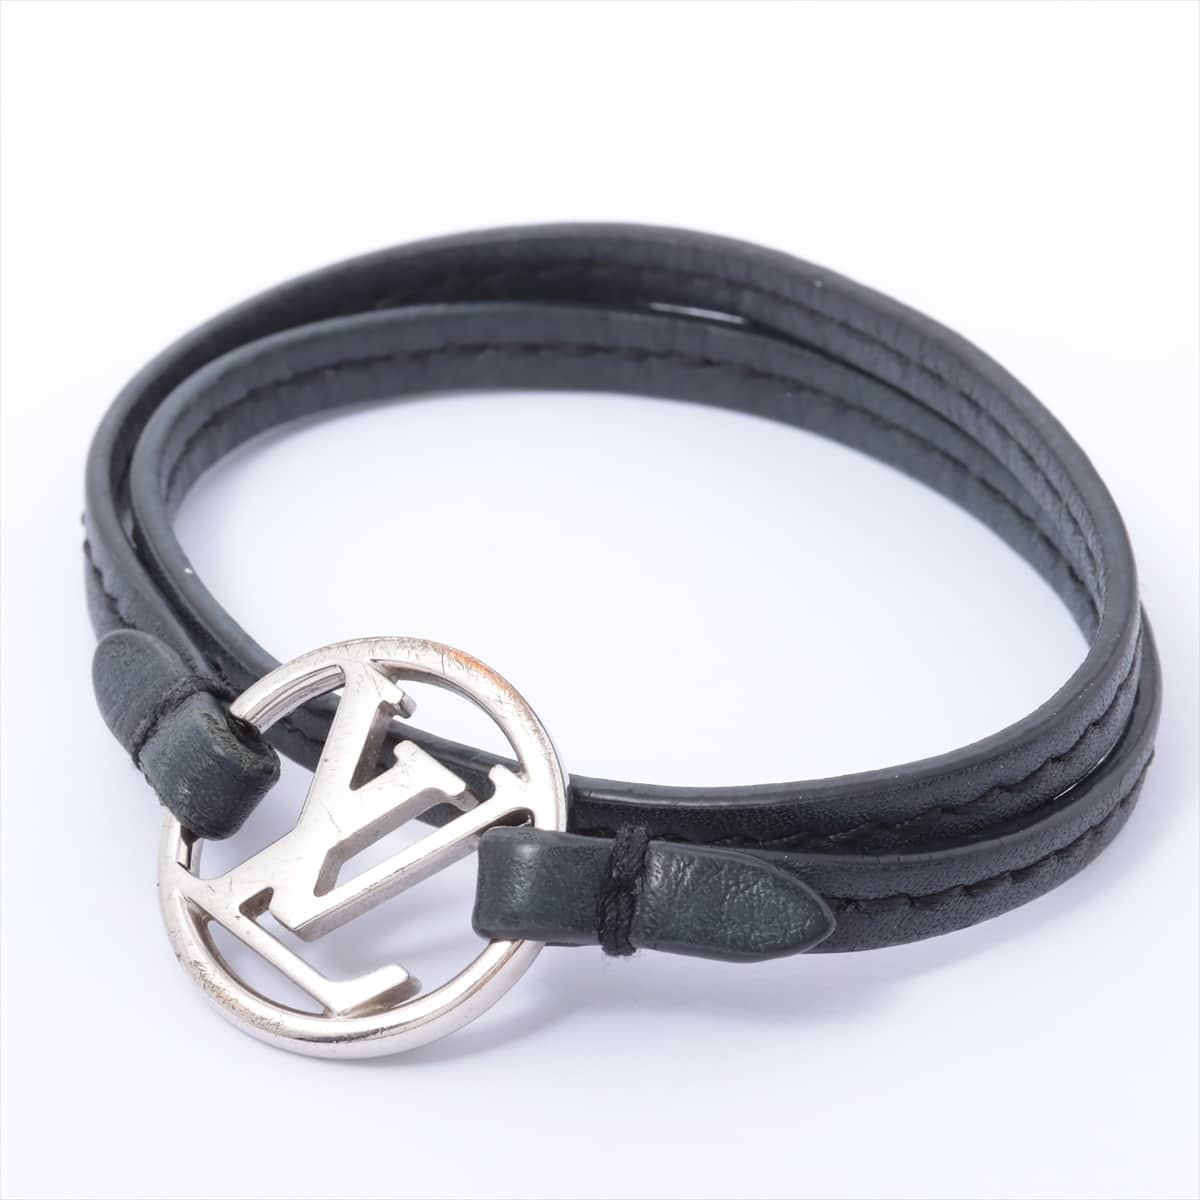 Louis Vuitton model number unknown Unknown Model BC1117 Choker Leather Black